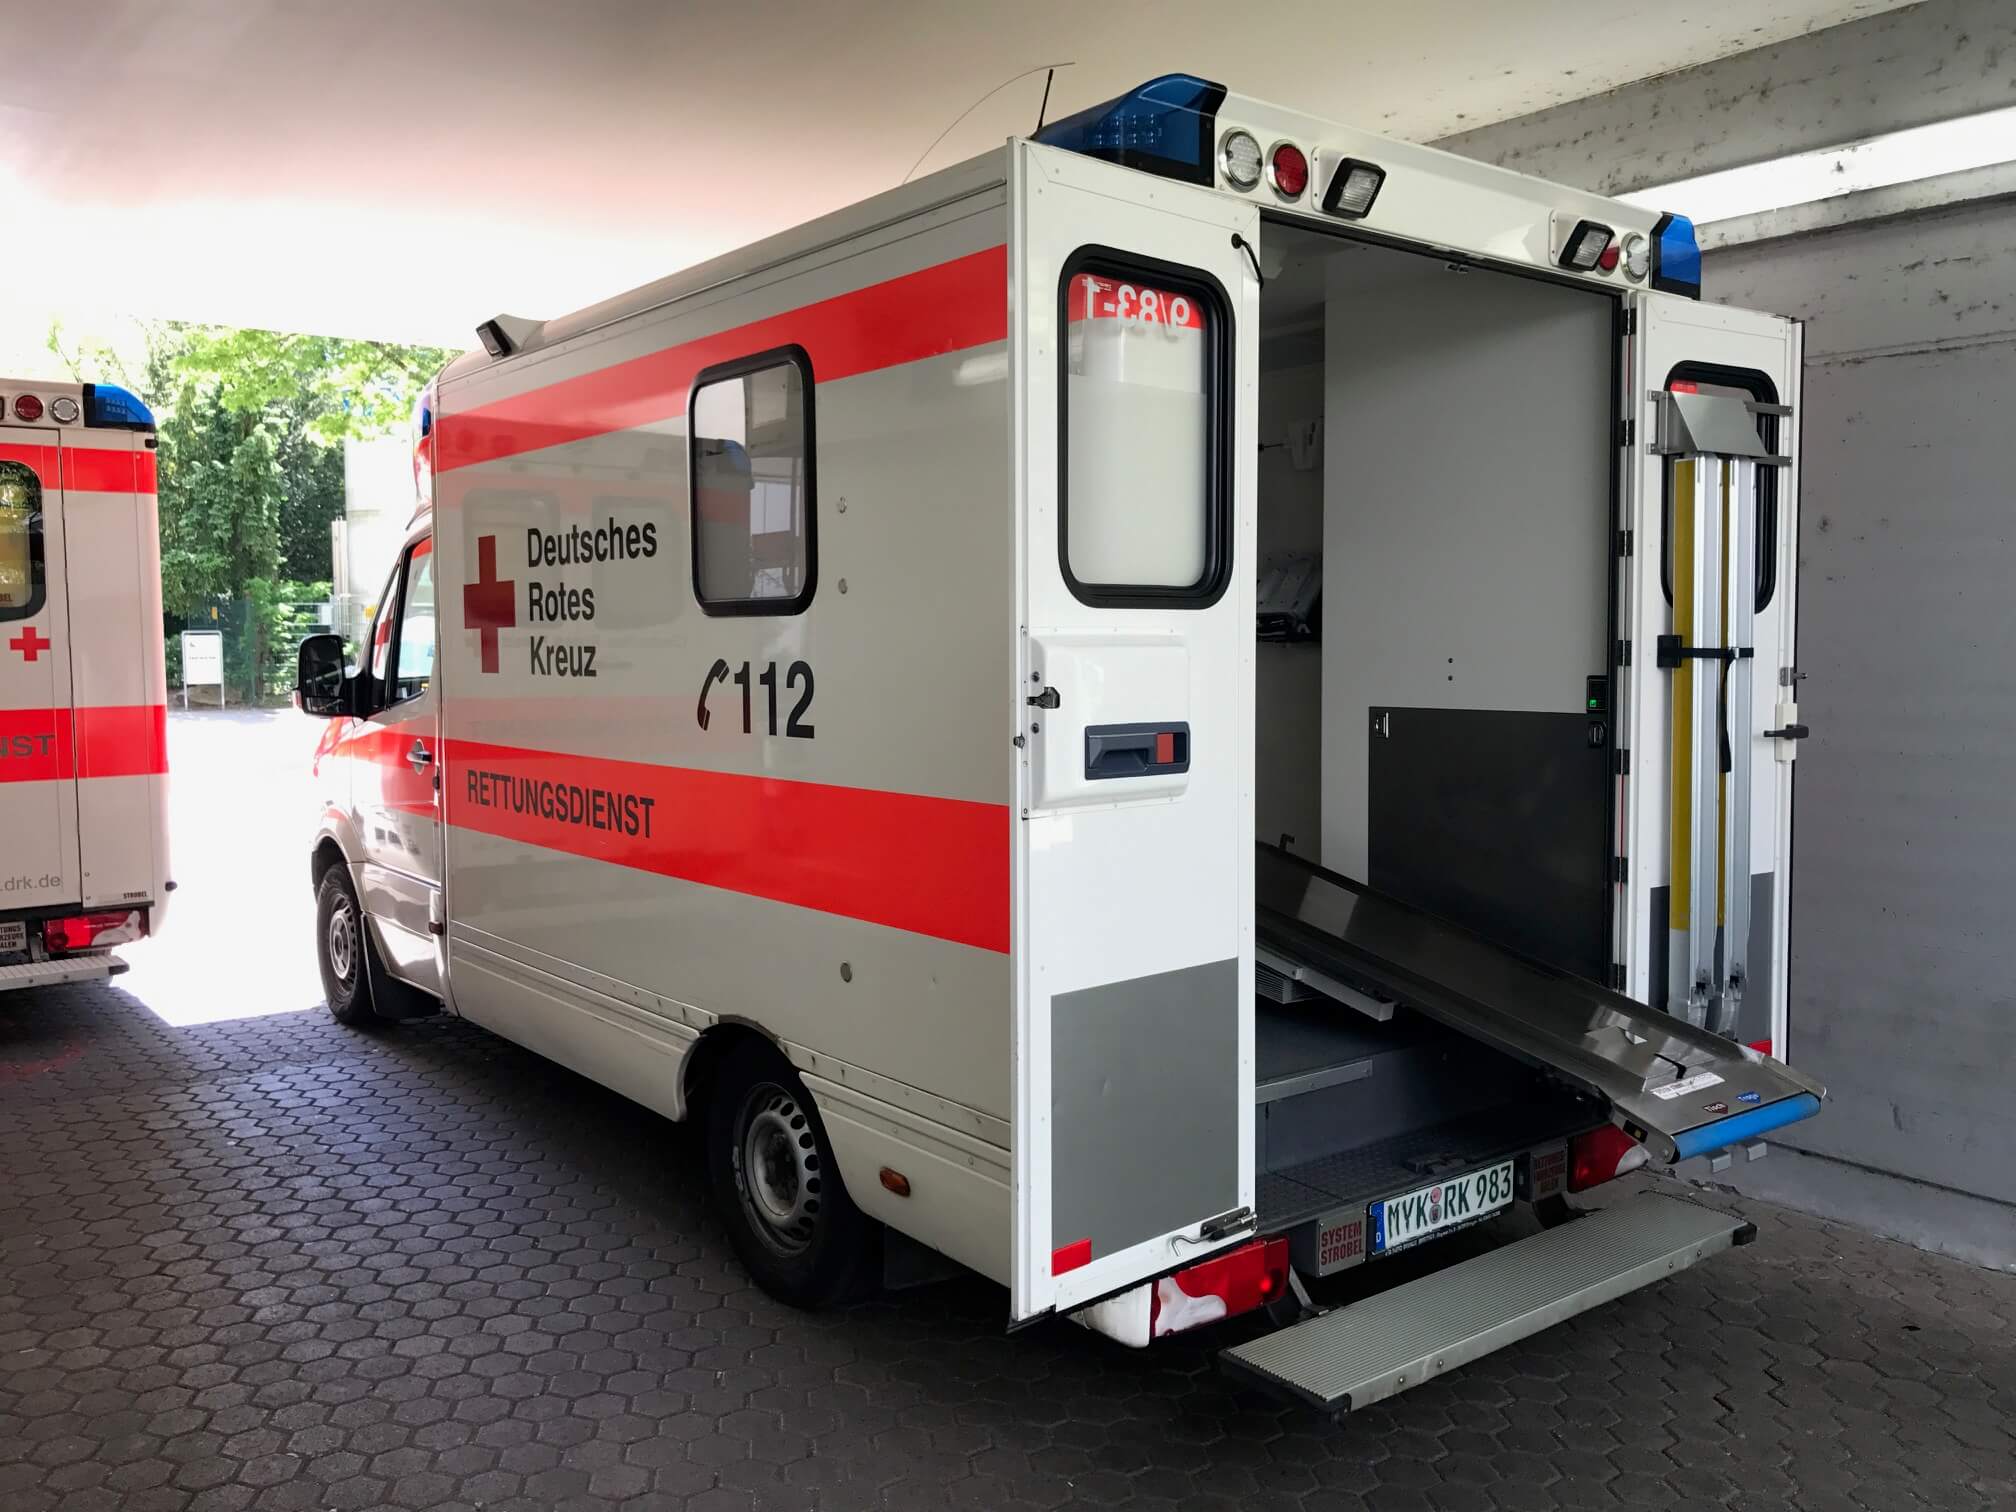 Nice looking German Ambulance at the hospital in Koblenz